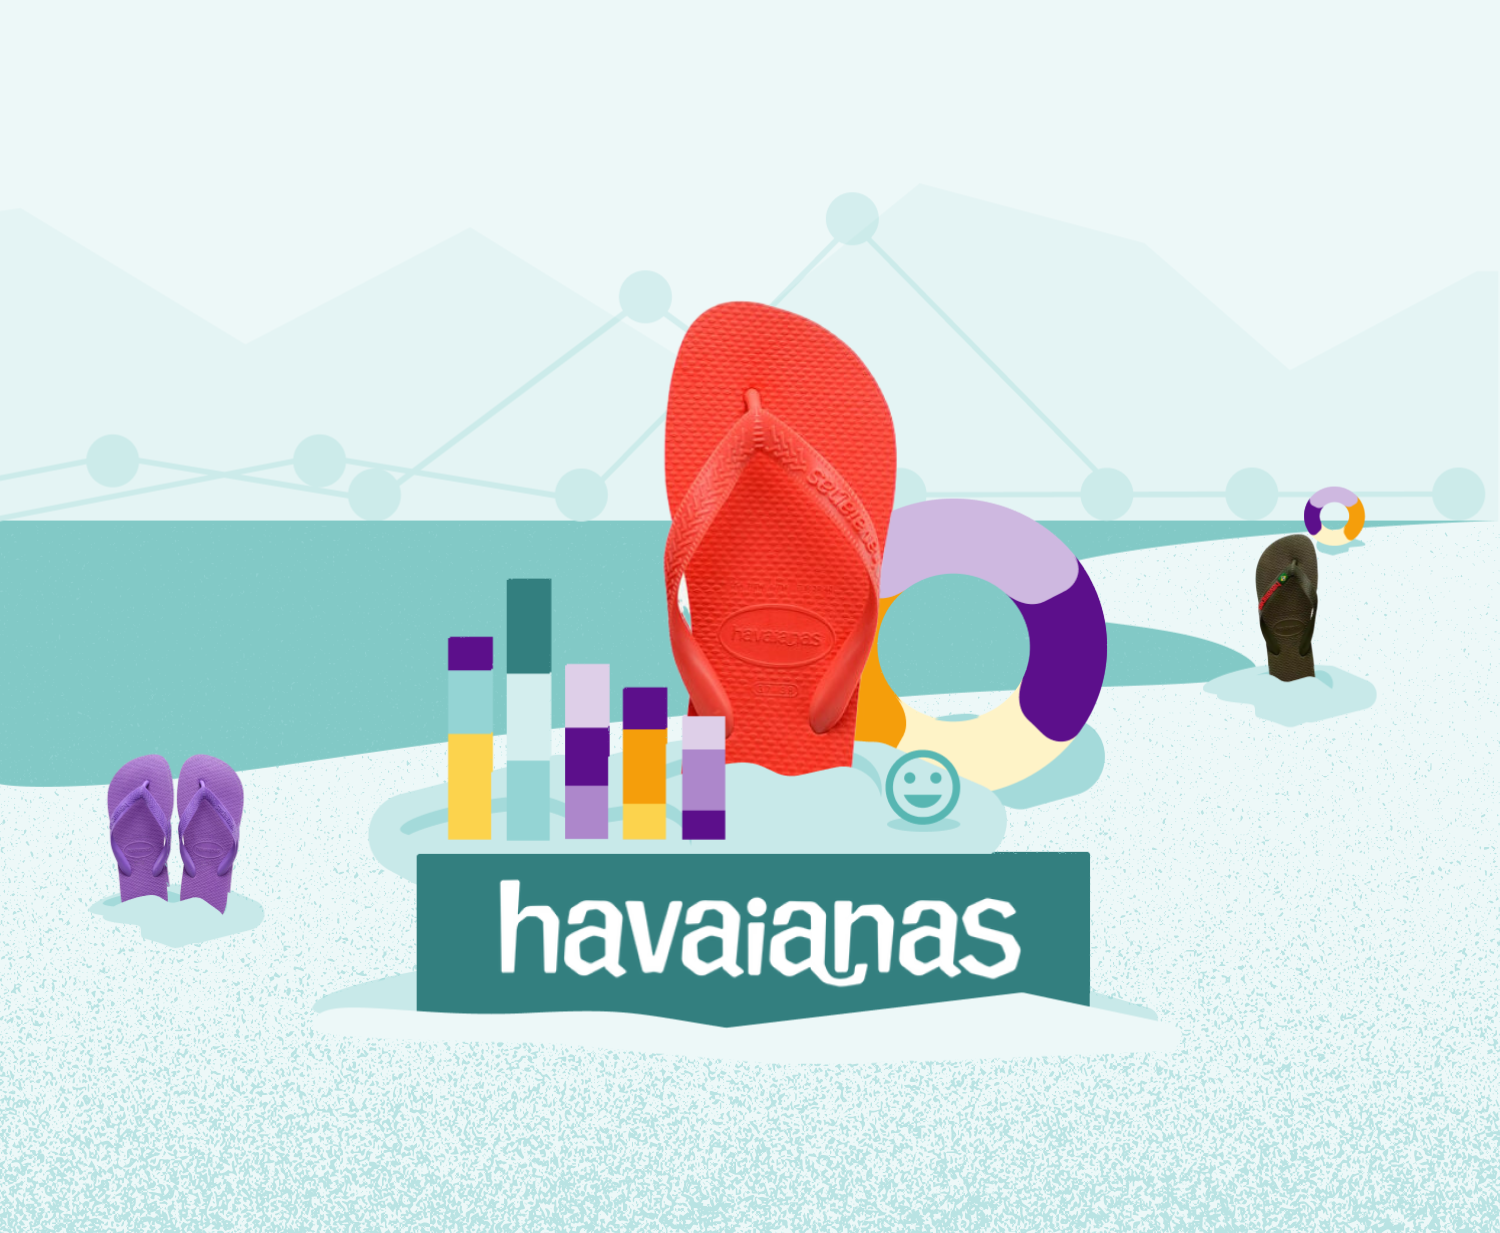 Case Study: How Havaianas improved DTC sales through distributor monitoring